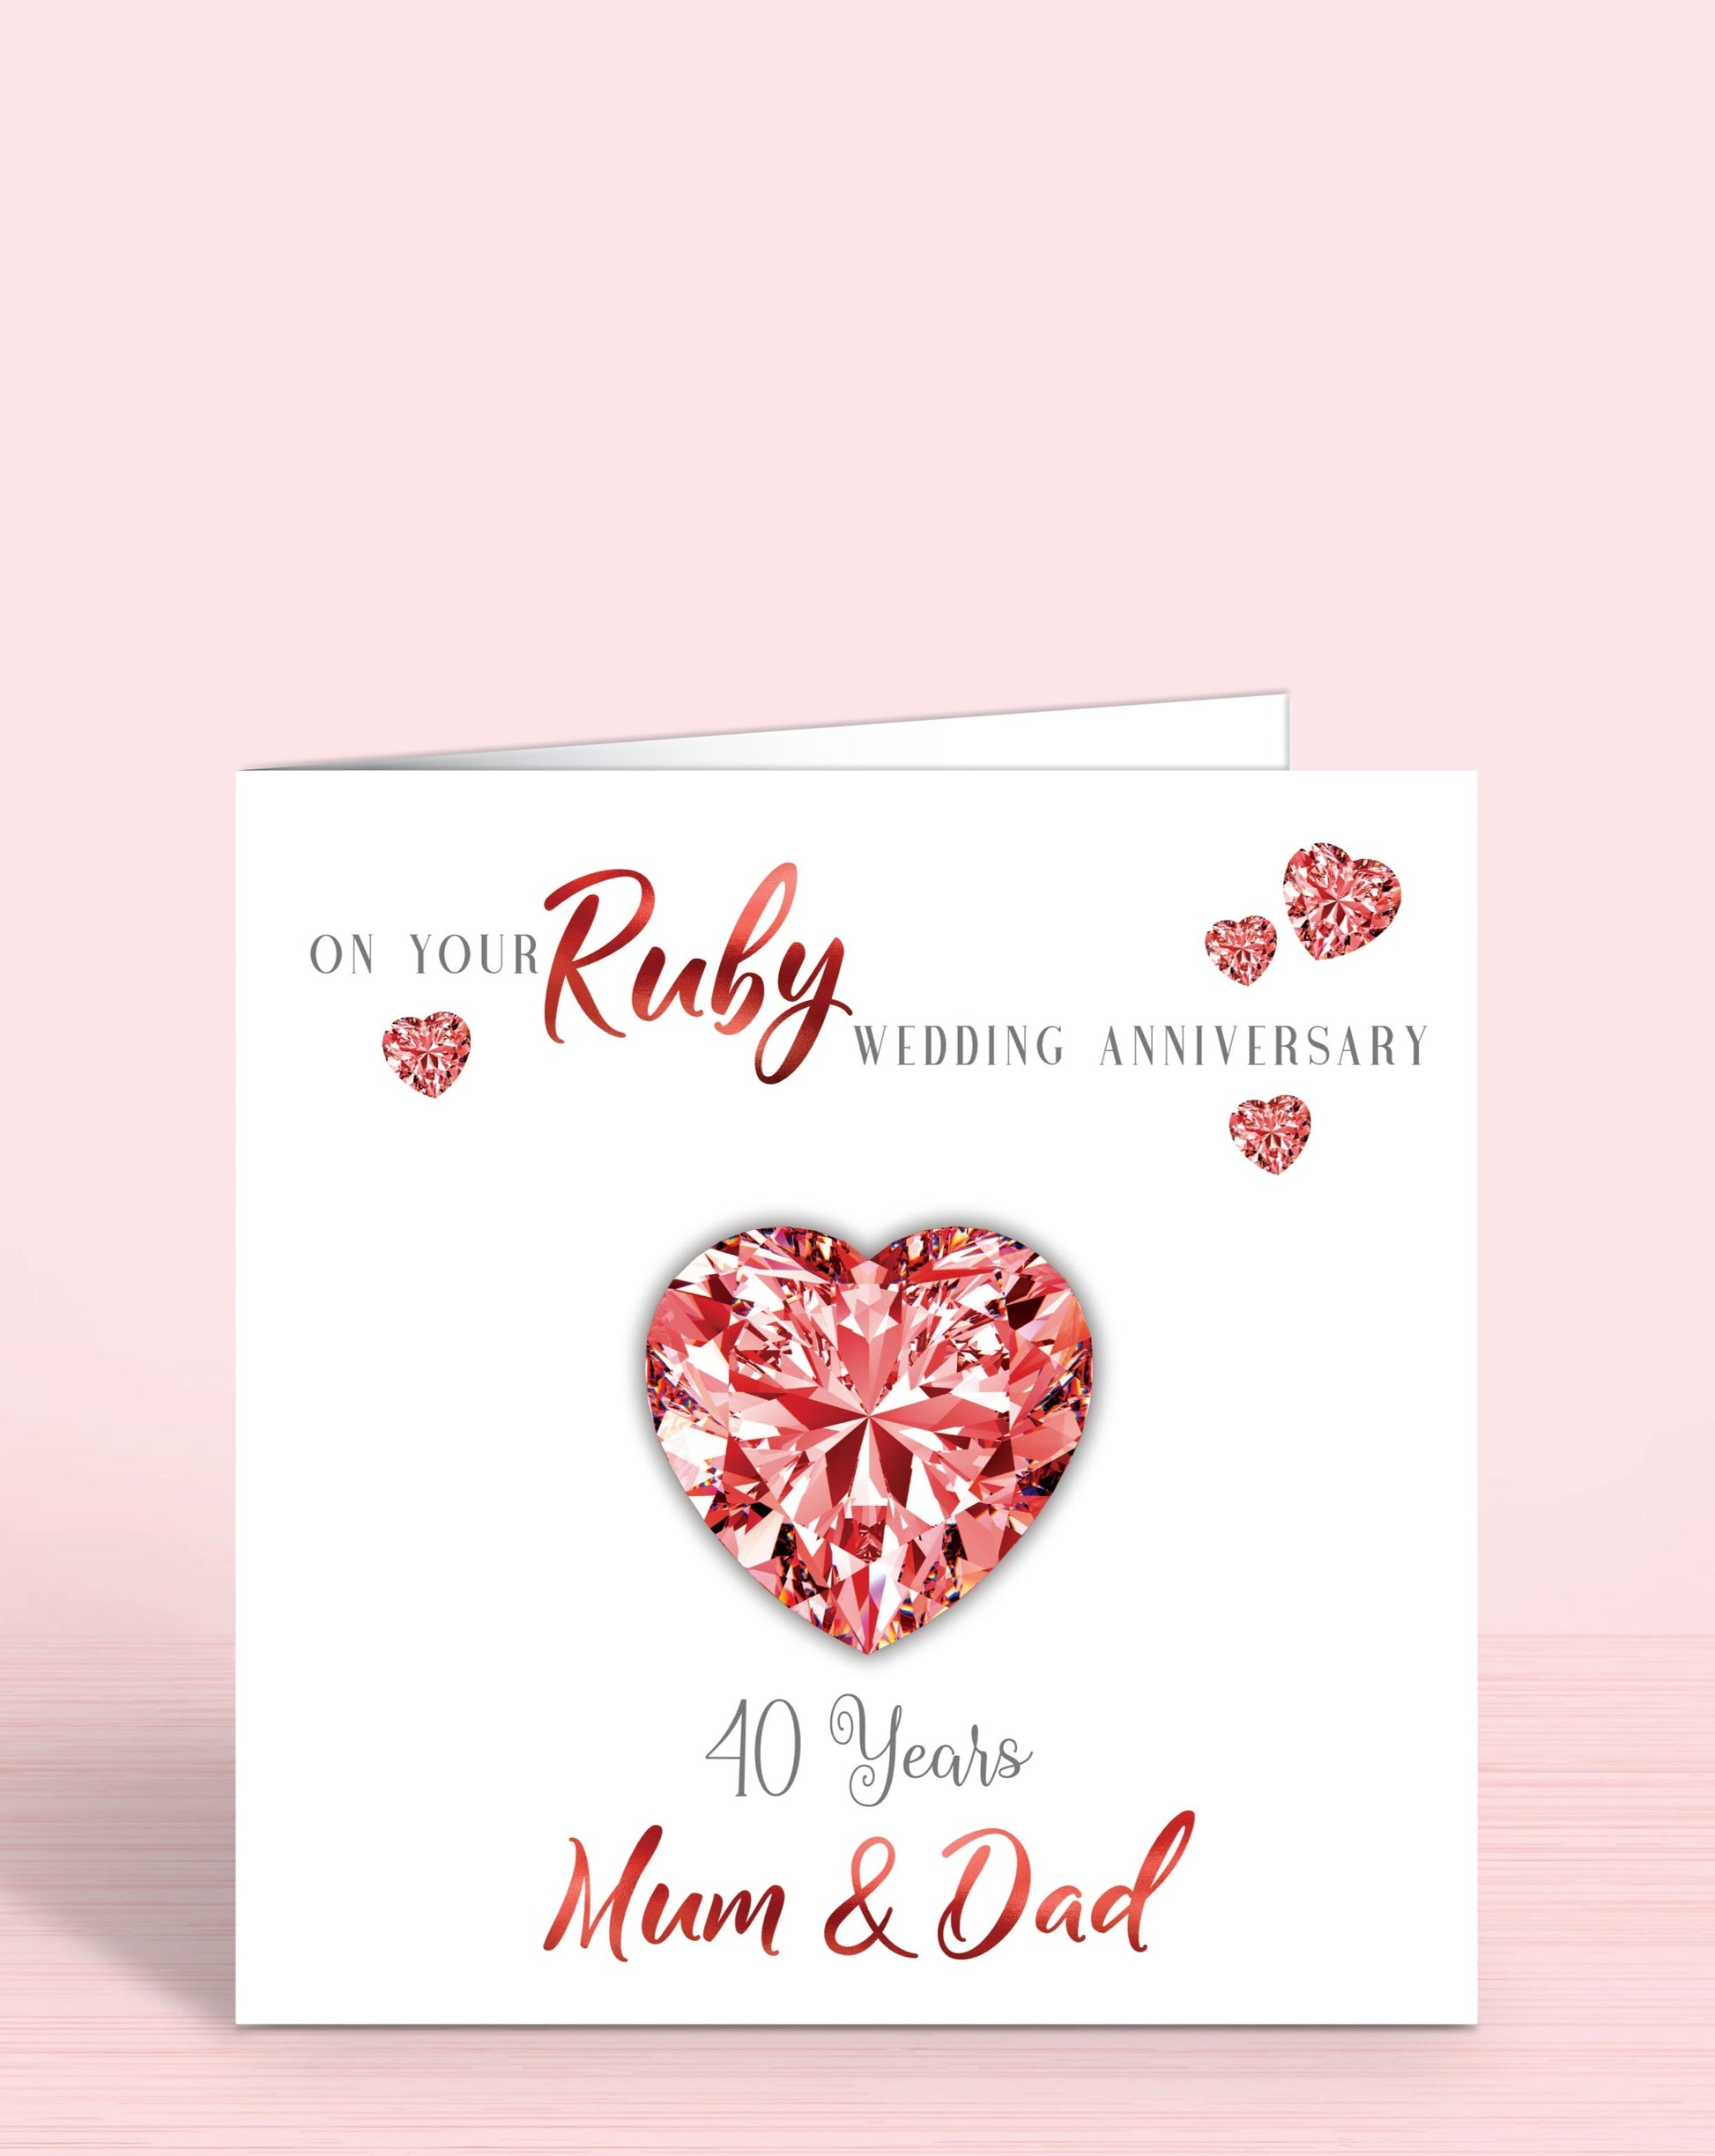 40th Ruby Anniversary Card, mum & dad, 40 years, on your wedding anniversary | Oliver Rose Designs